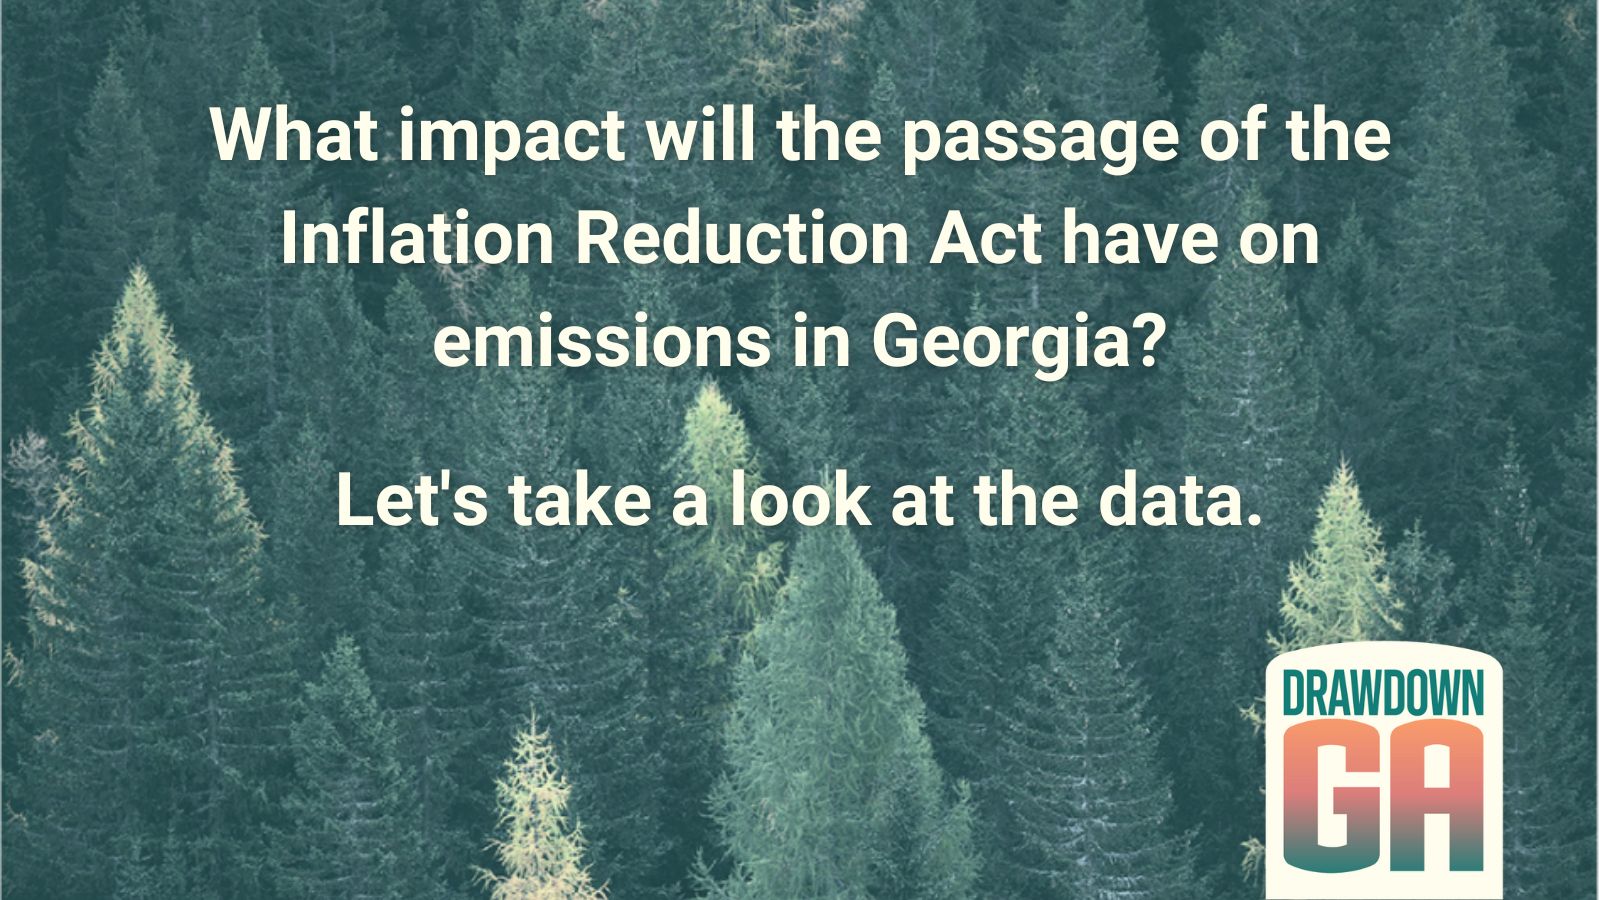 Explore the Climate Impact of the Inflation Reduction Act with the GHG Emissions Tracker